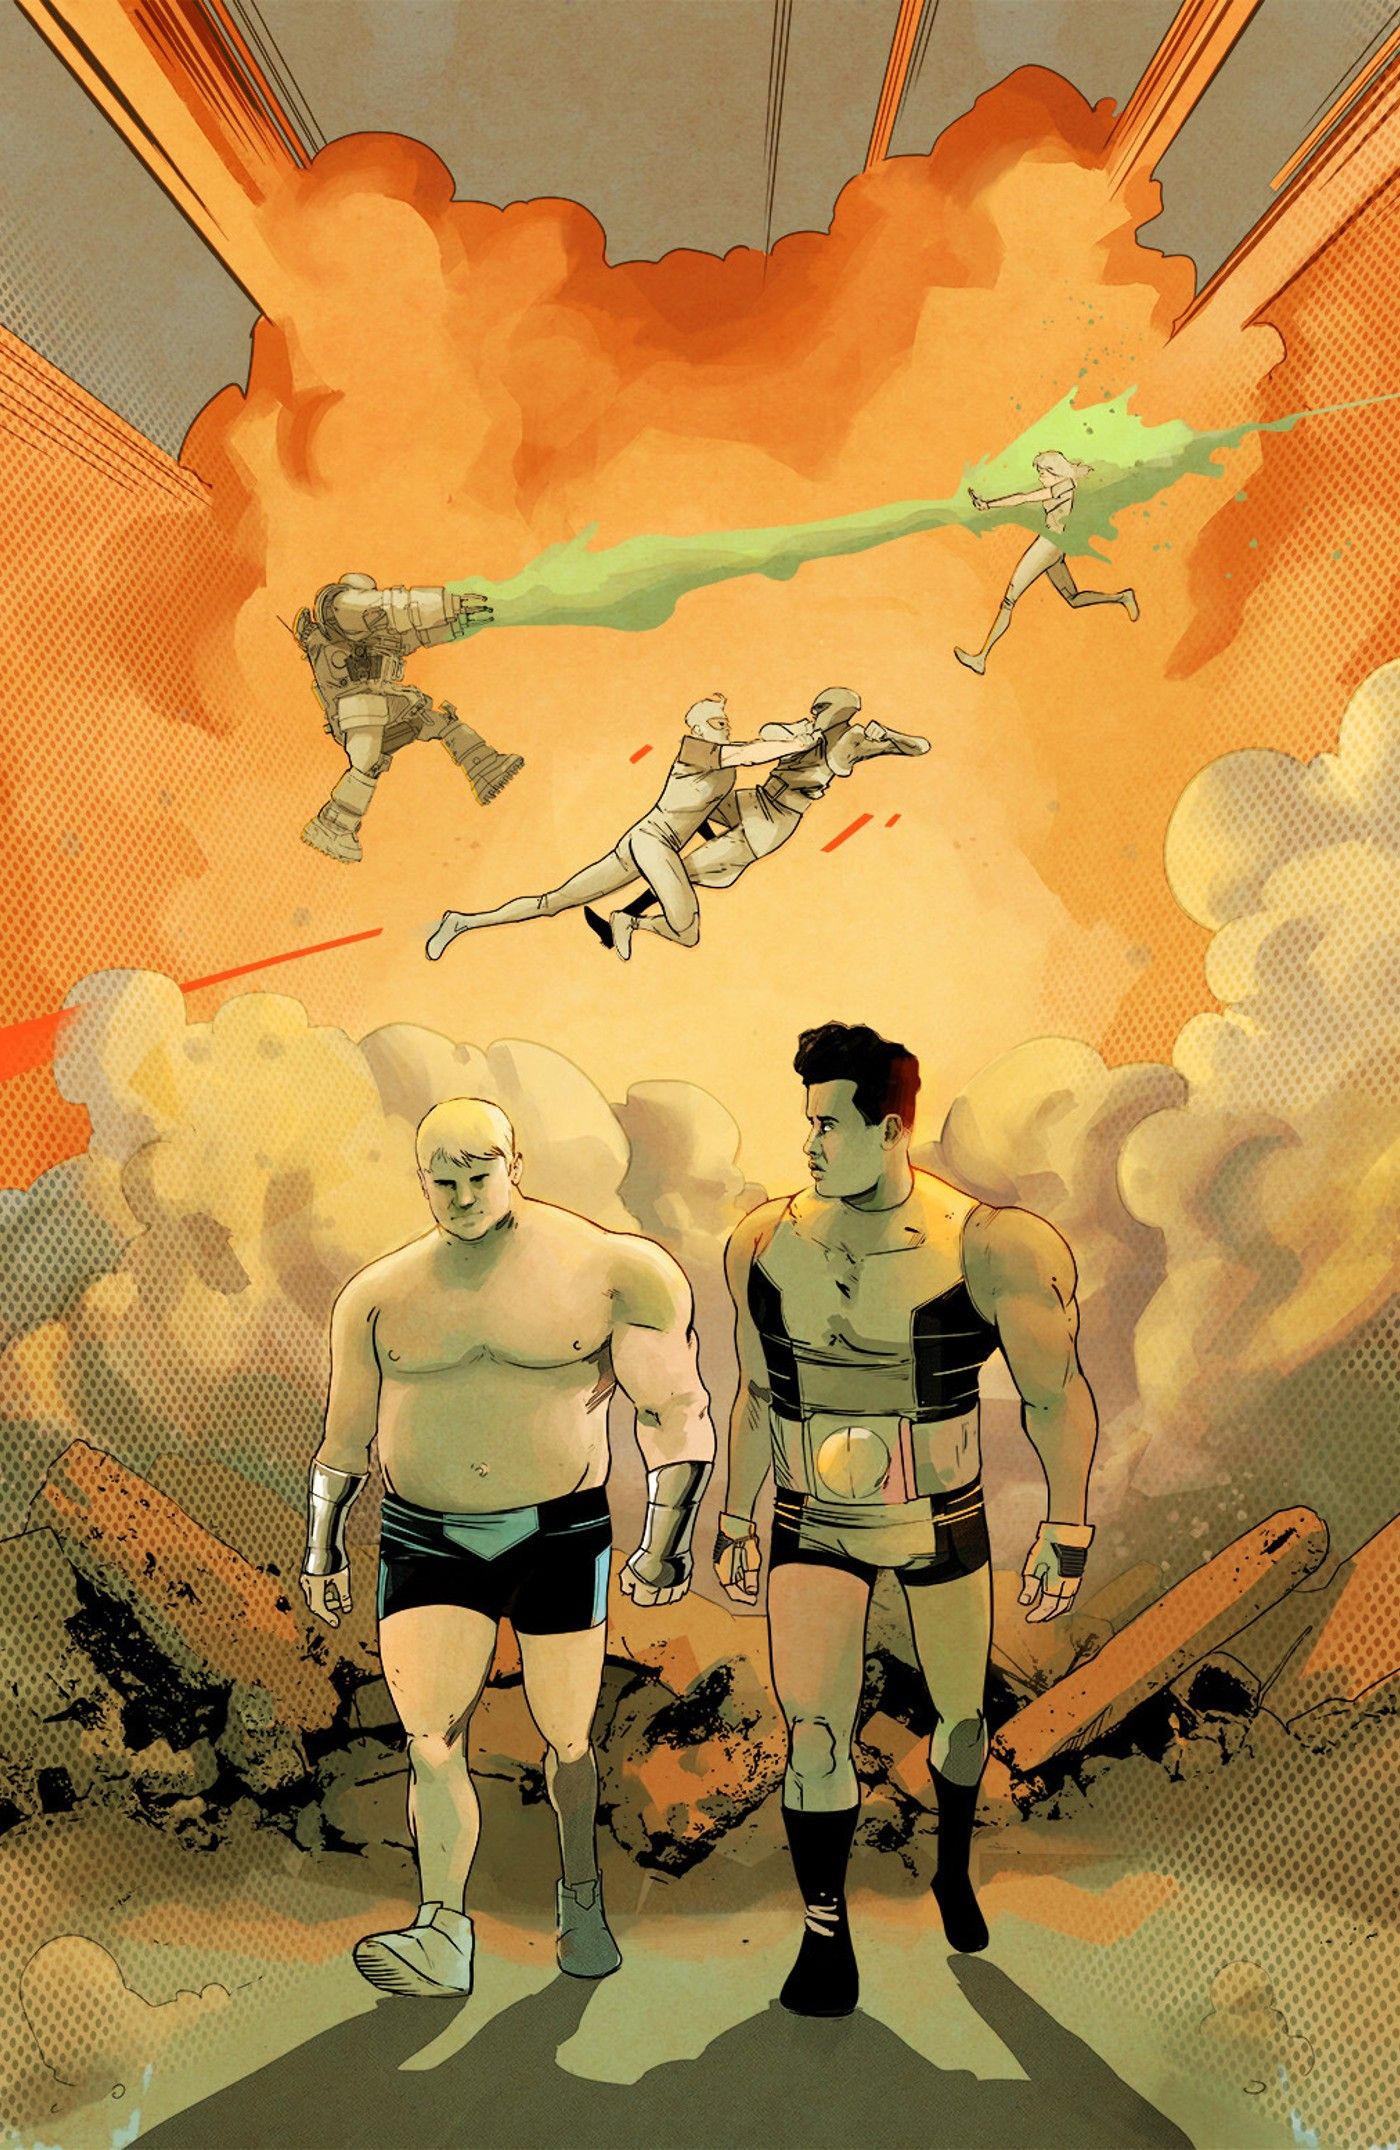 Clarence and Jerry walking together on the cover of Deadweights #1 from Ahoy Comics